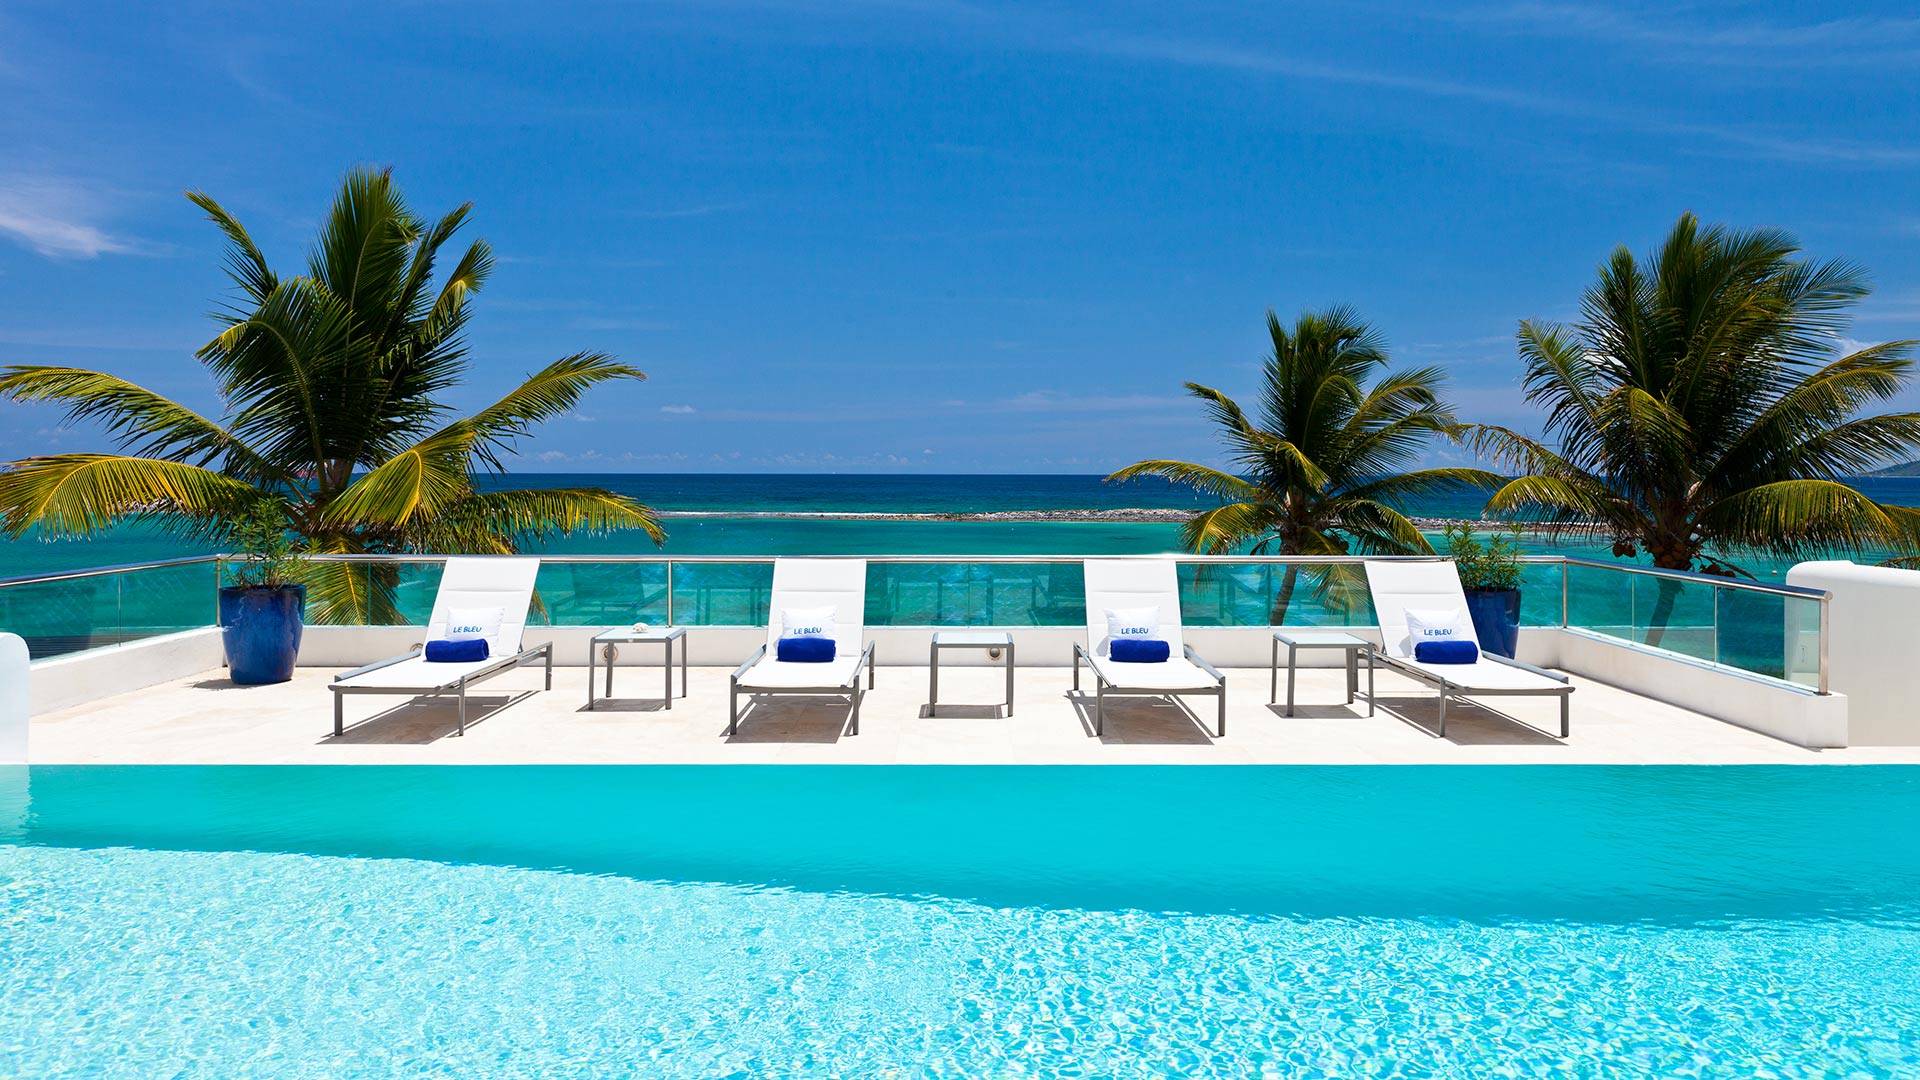 Le Bleu offers top luxury and service in a beachfront Anguilla rental villa.
